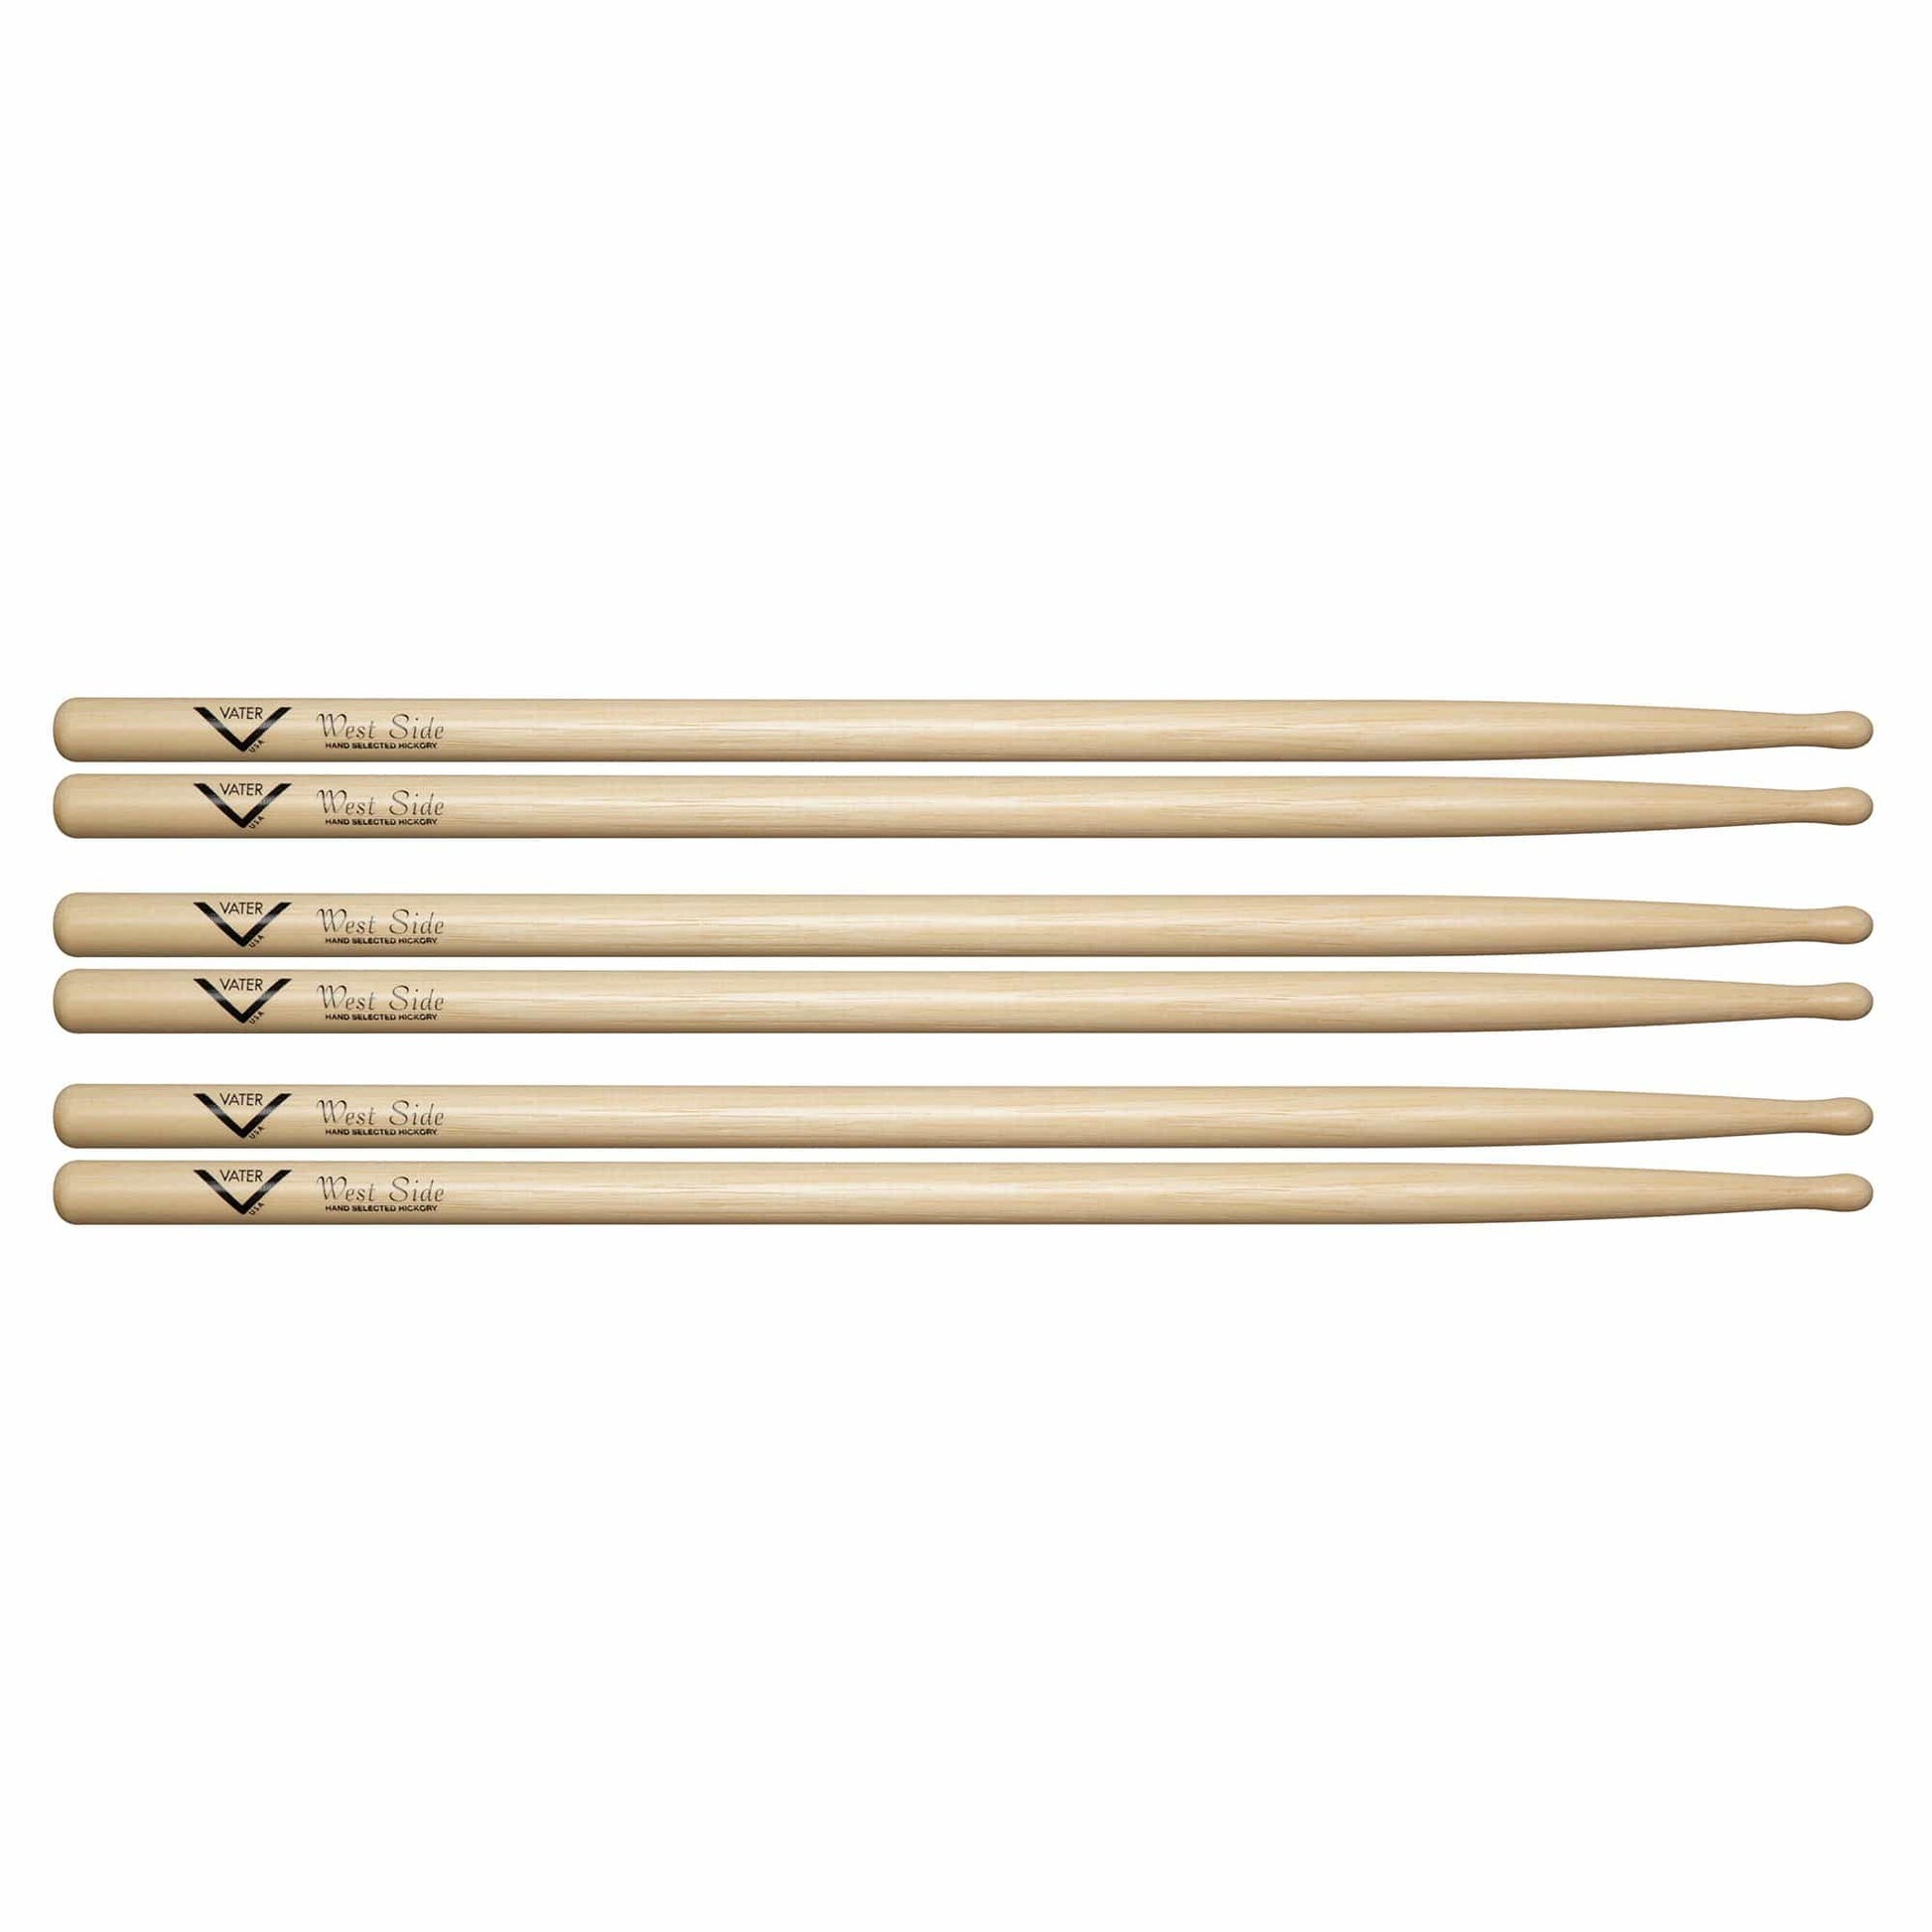 Vater Hickory West Side Wood Tip Drum Sticks (3 Pair Bundle) Drums and Percussion